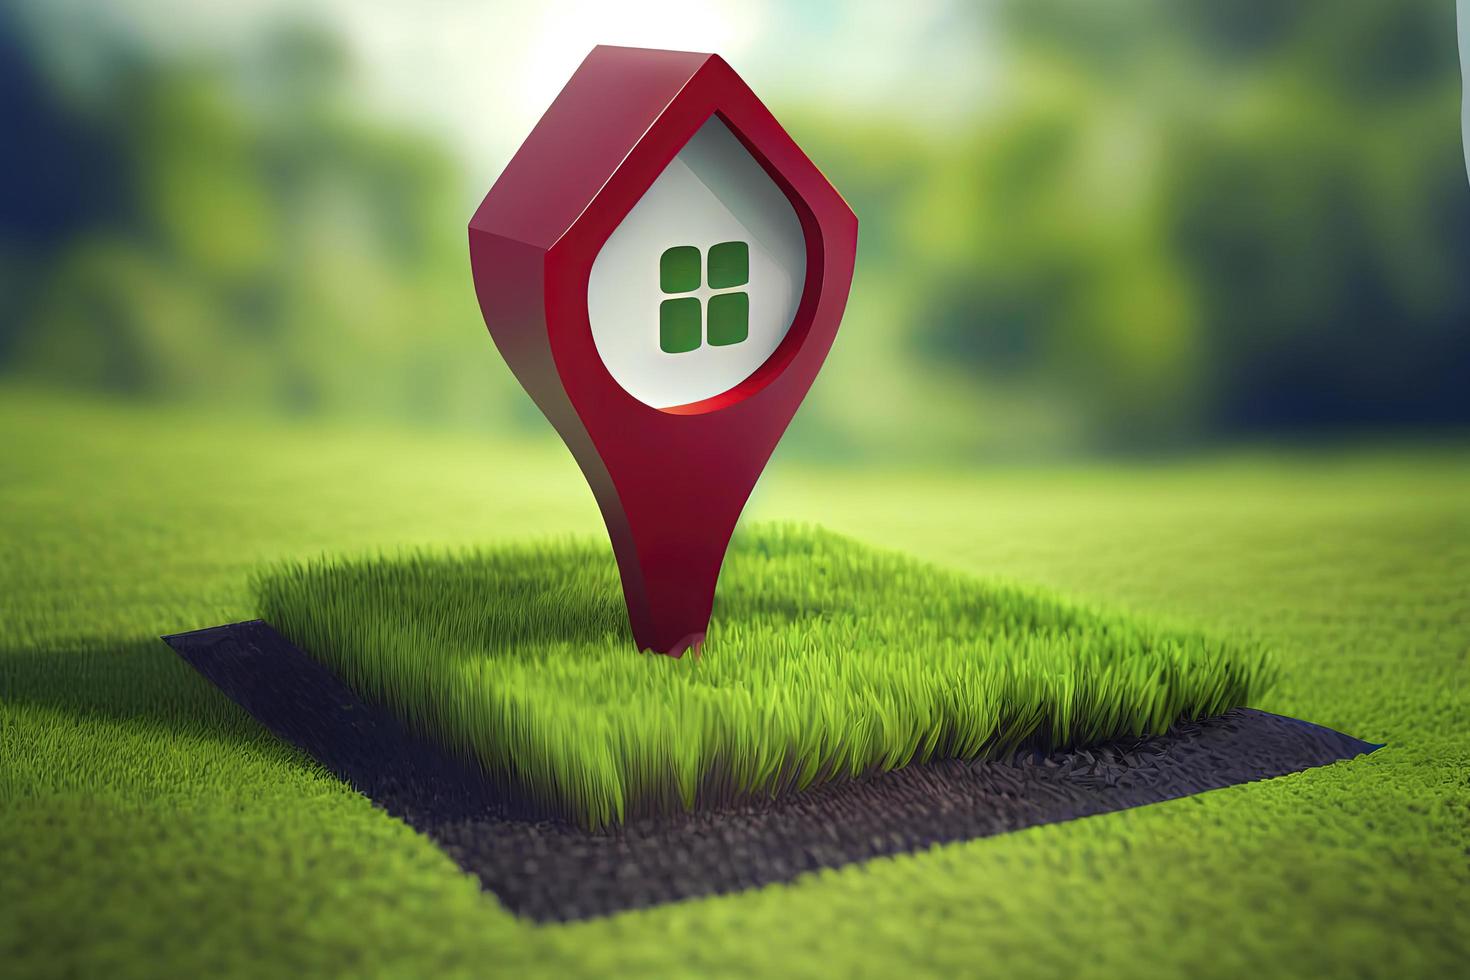 House symbol with location pin icon on earth and green grass in real estate sale photo